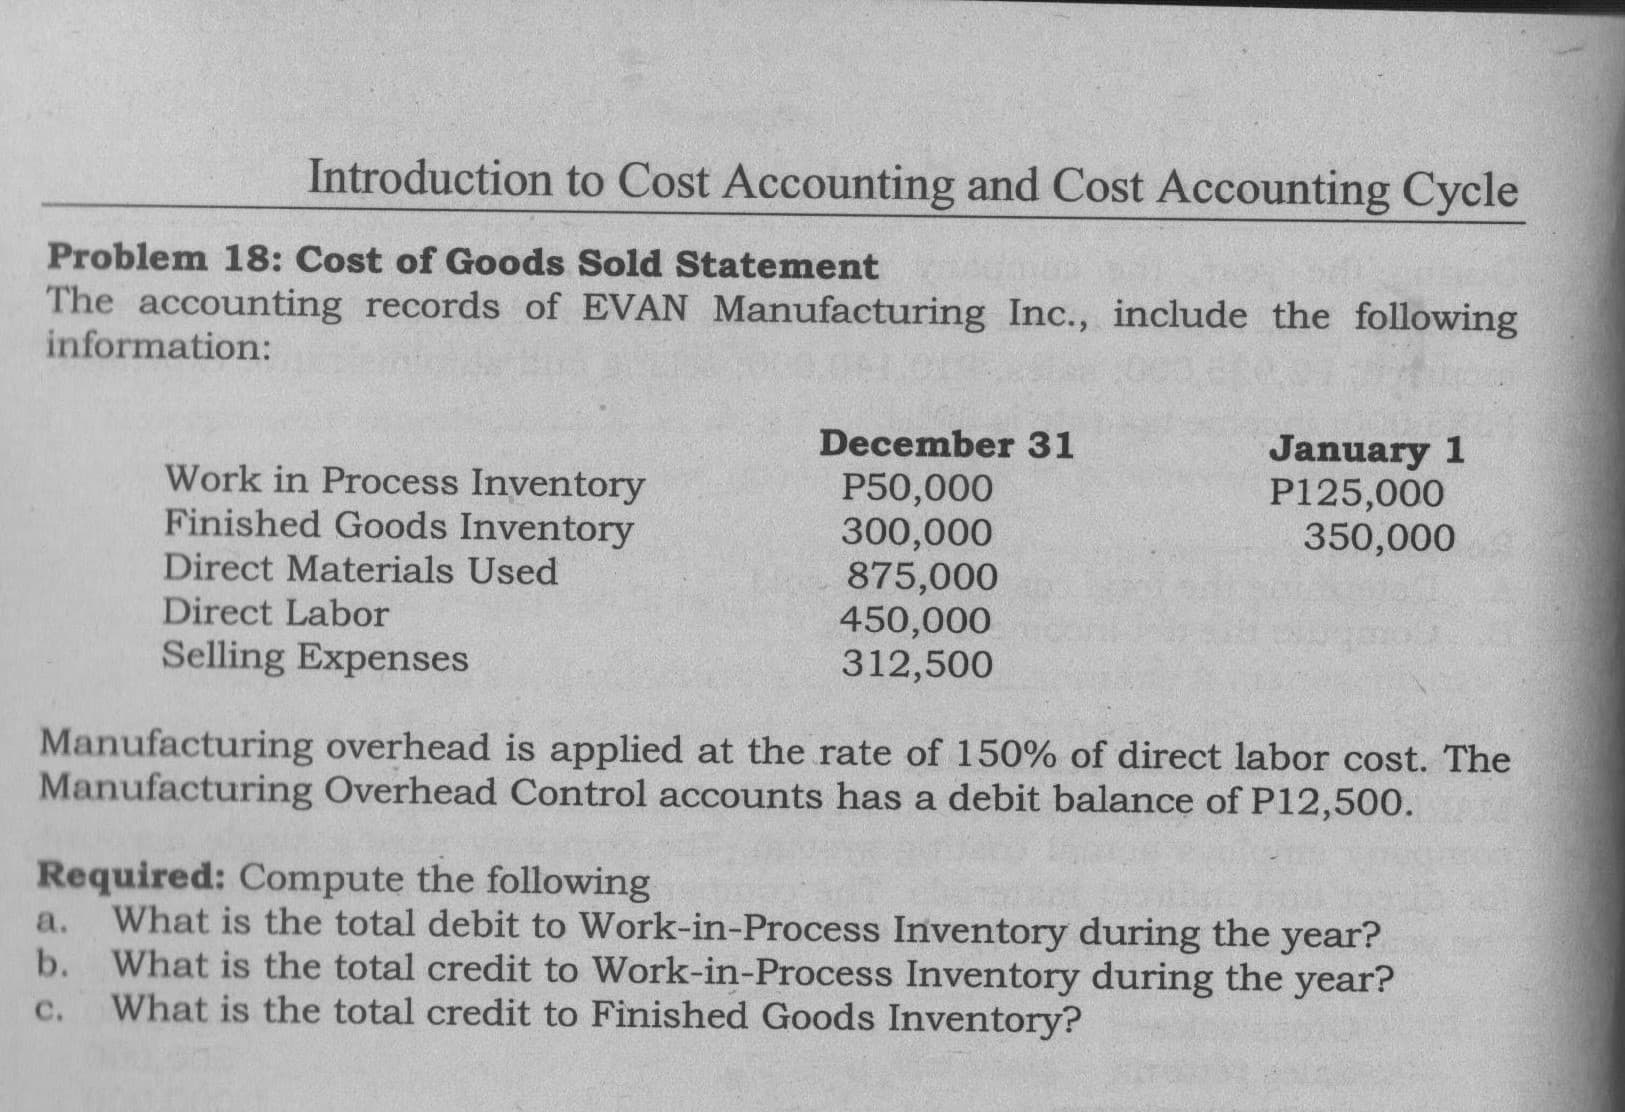 The accounting records of EVAN Manufacturing Inc., include the following
information:
December 31
Work in Process Inventory
Finished Goods Inventory
Direct Materials Used
Direct Labor
P50,000
300,000
875,000
450,000
312,500
January 1
P125,000
350,000
Selling Expenses
